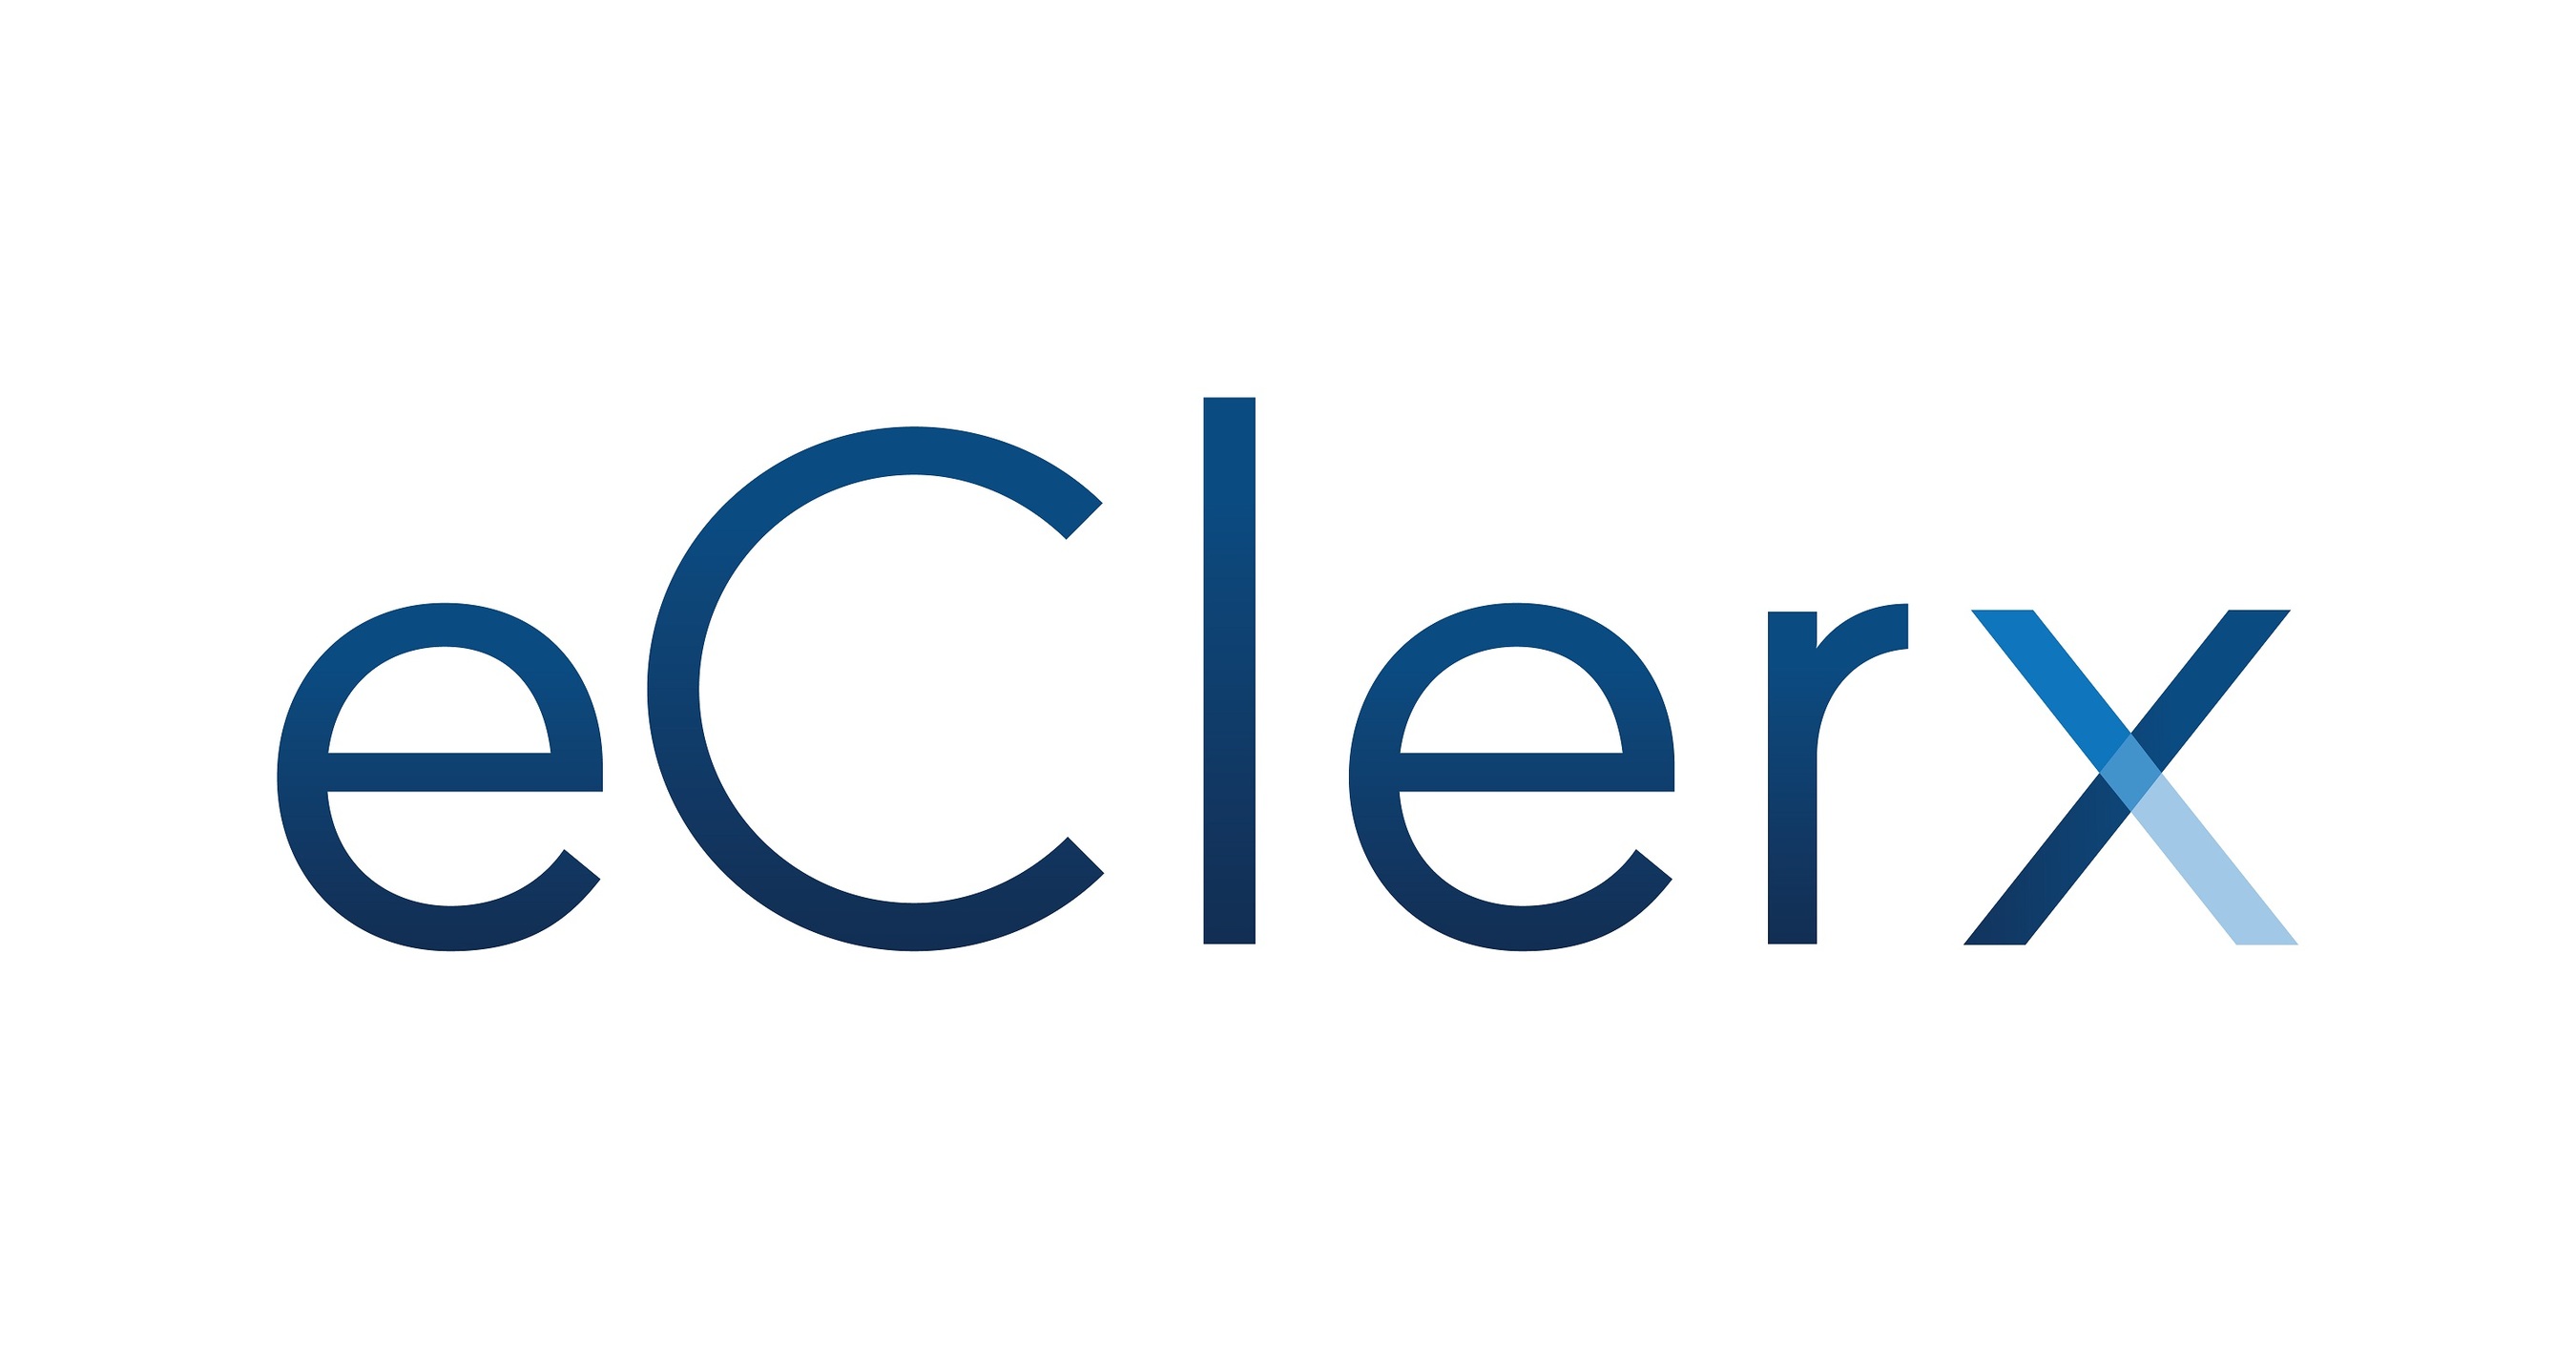 Business Process Management Leader, eClerx, Acquires Texas-Based Personiv